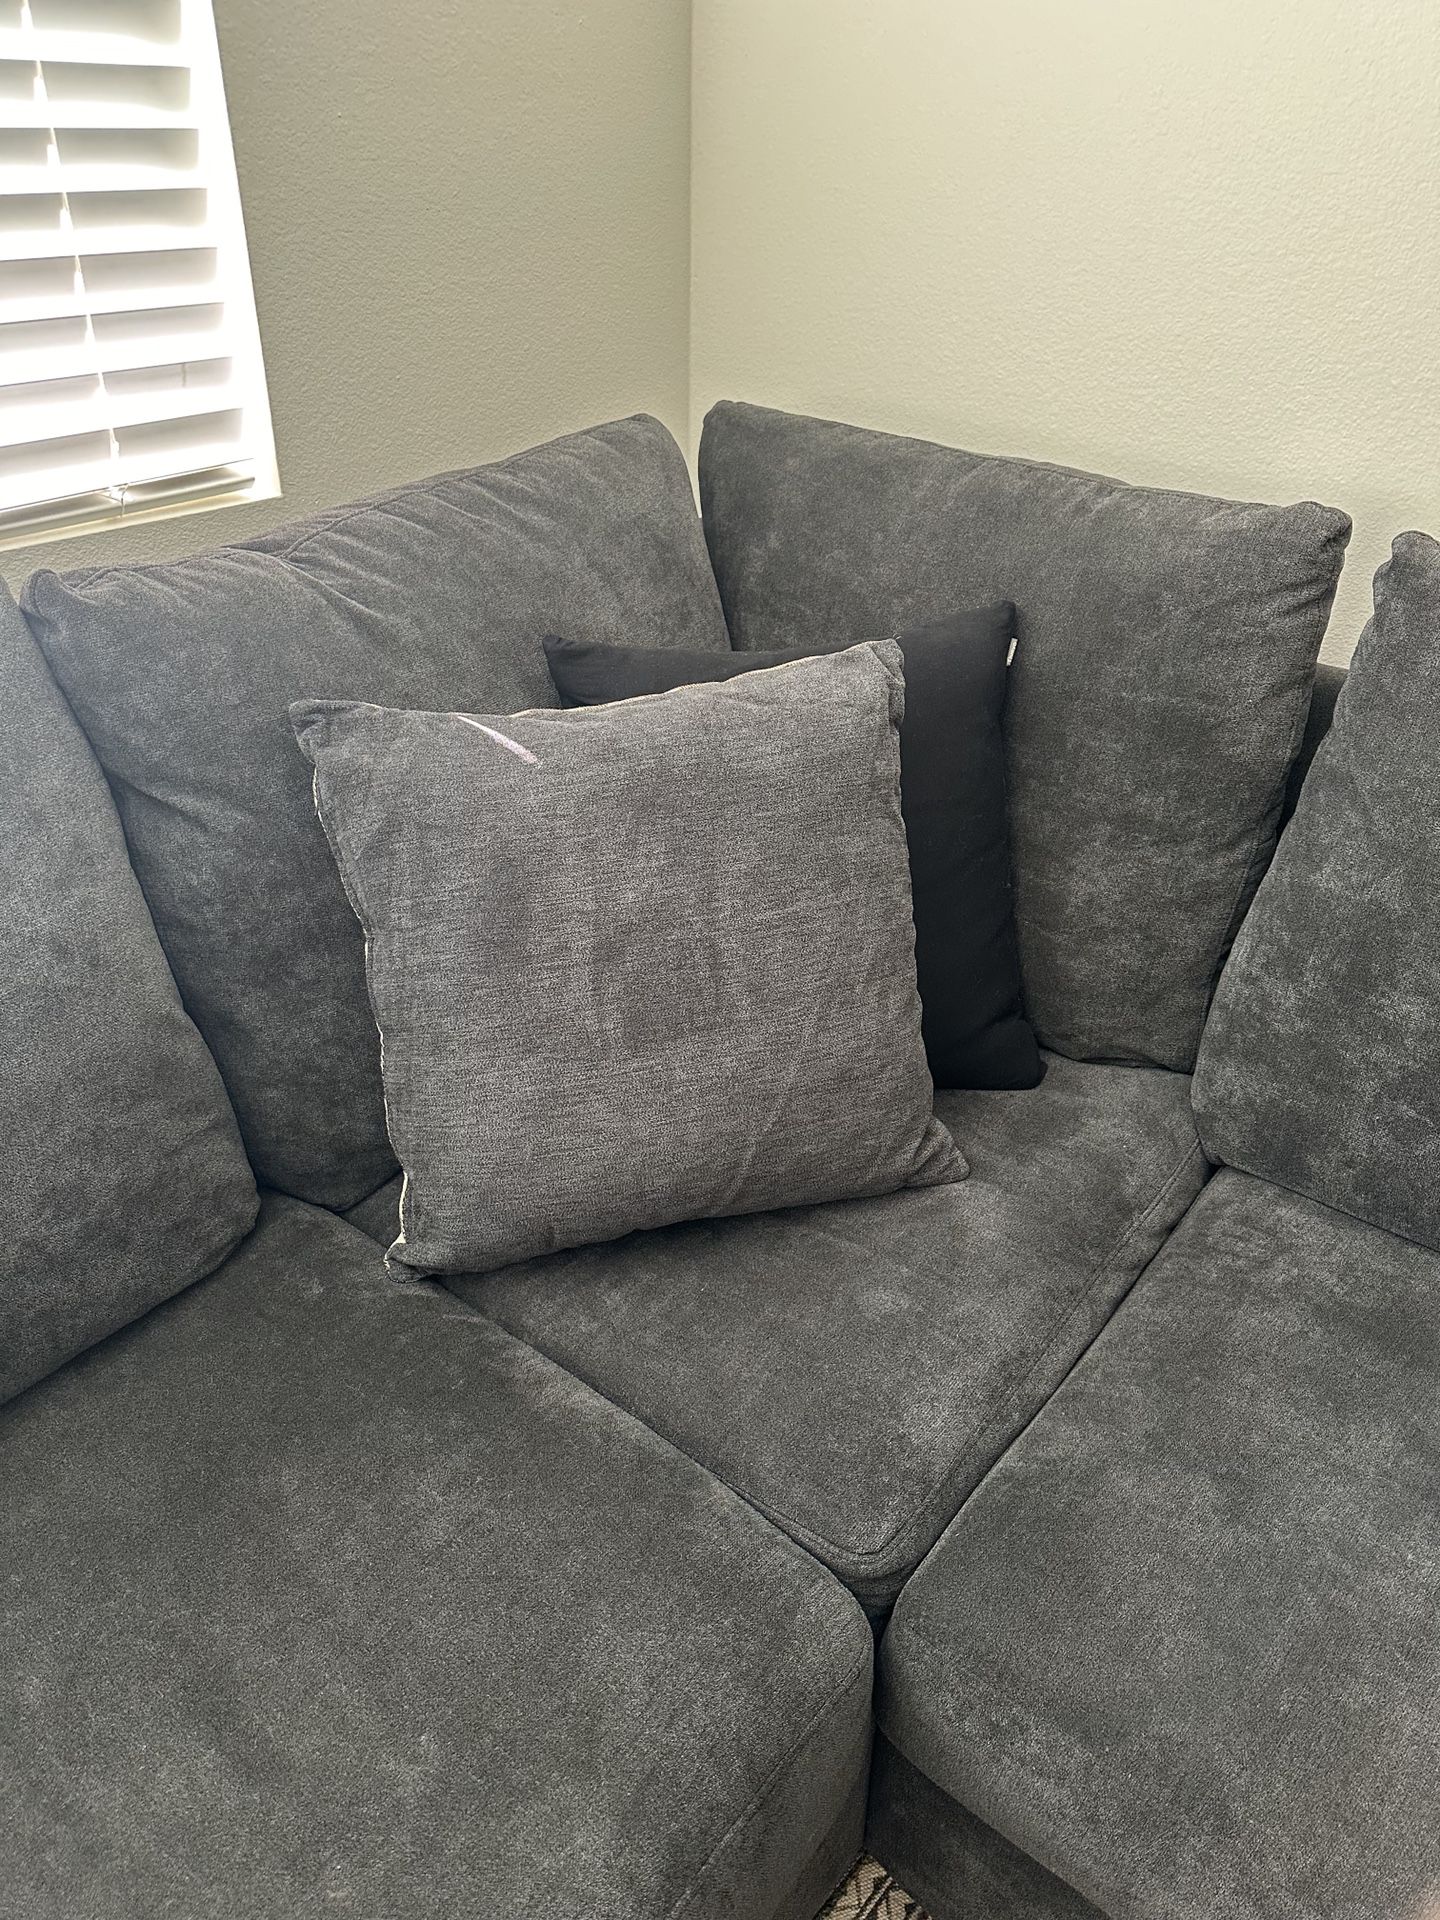 Gray Sectional Couch - Status As Of 4/25 - PENDING PICKUP